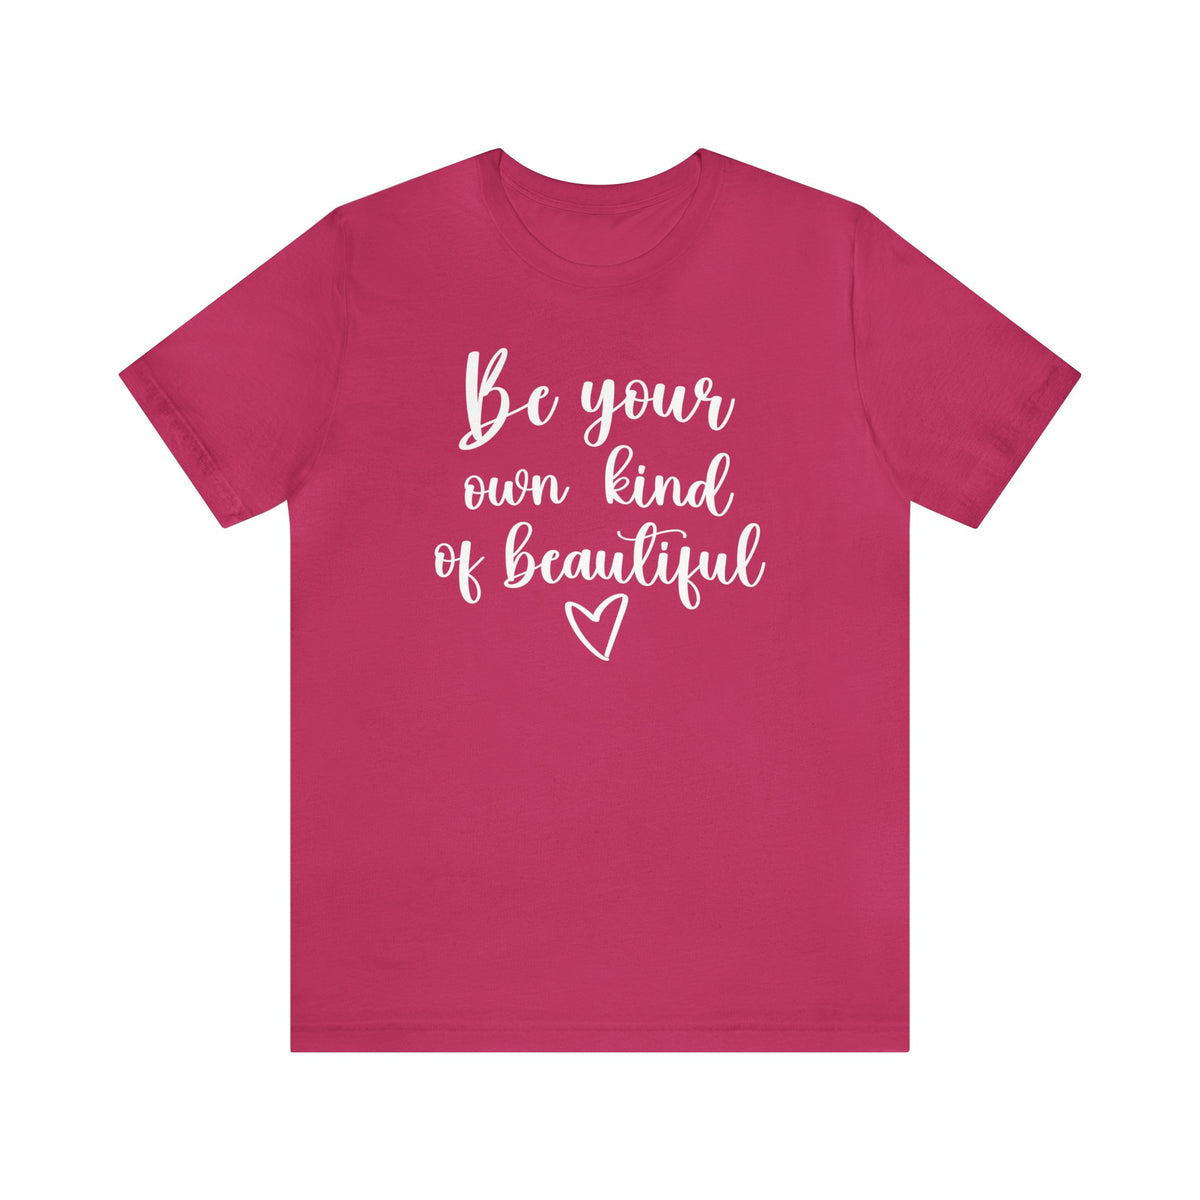 Your Own Kind of Beautiful tee